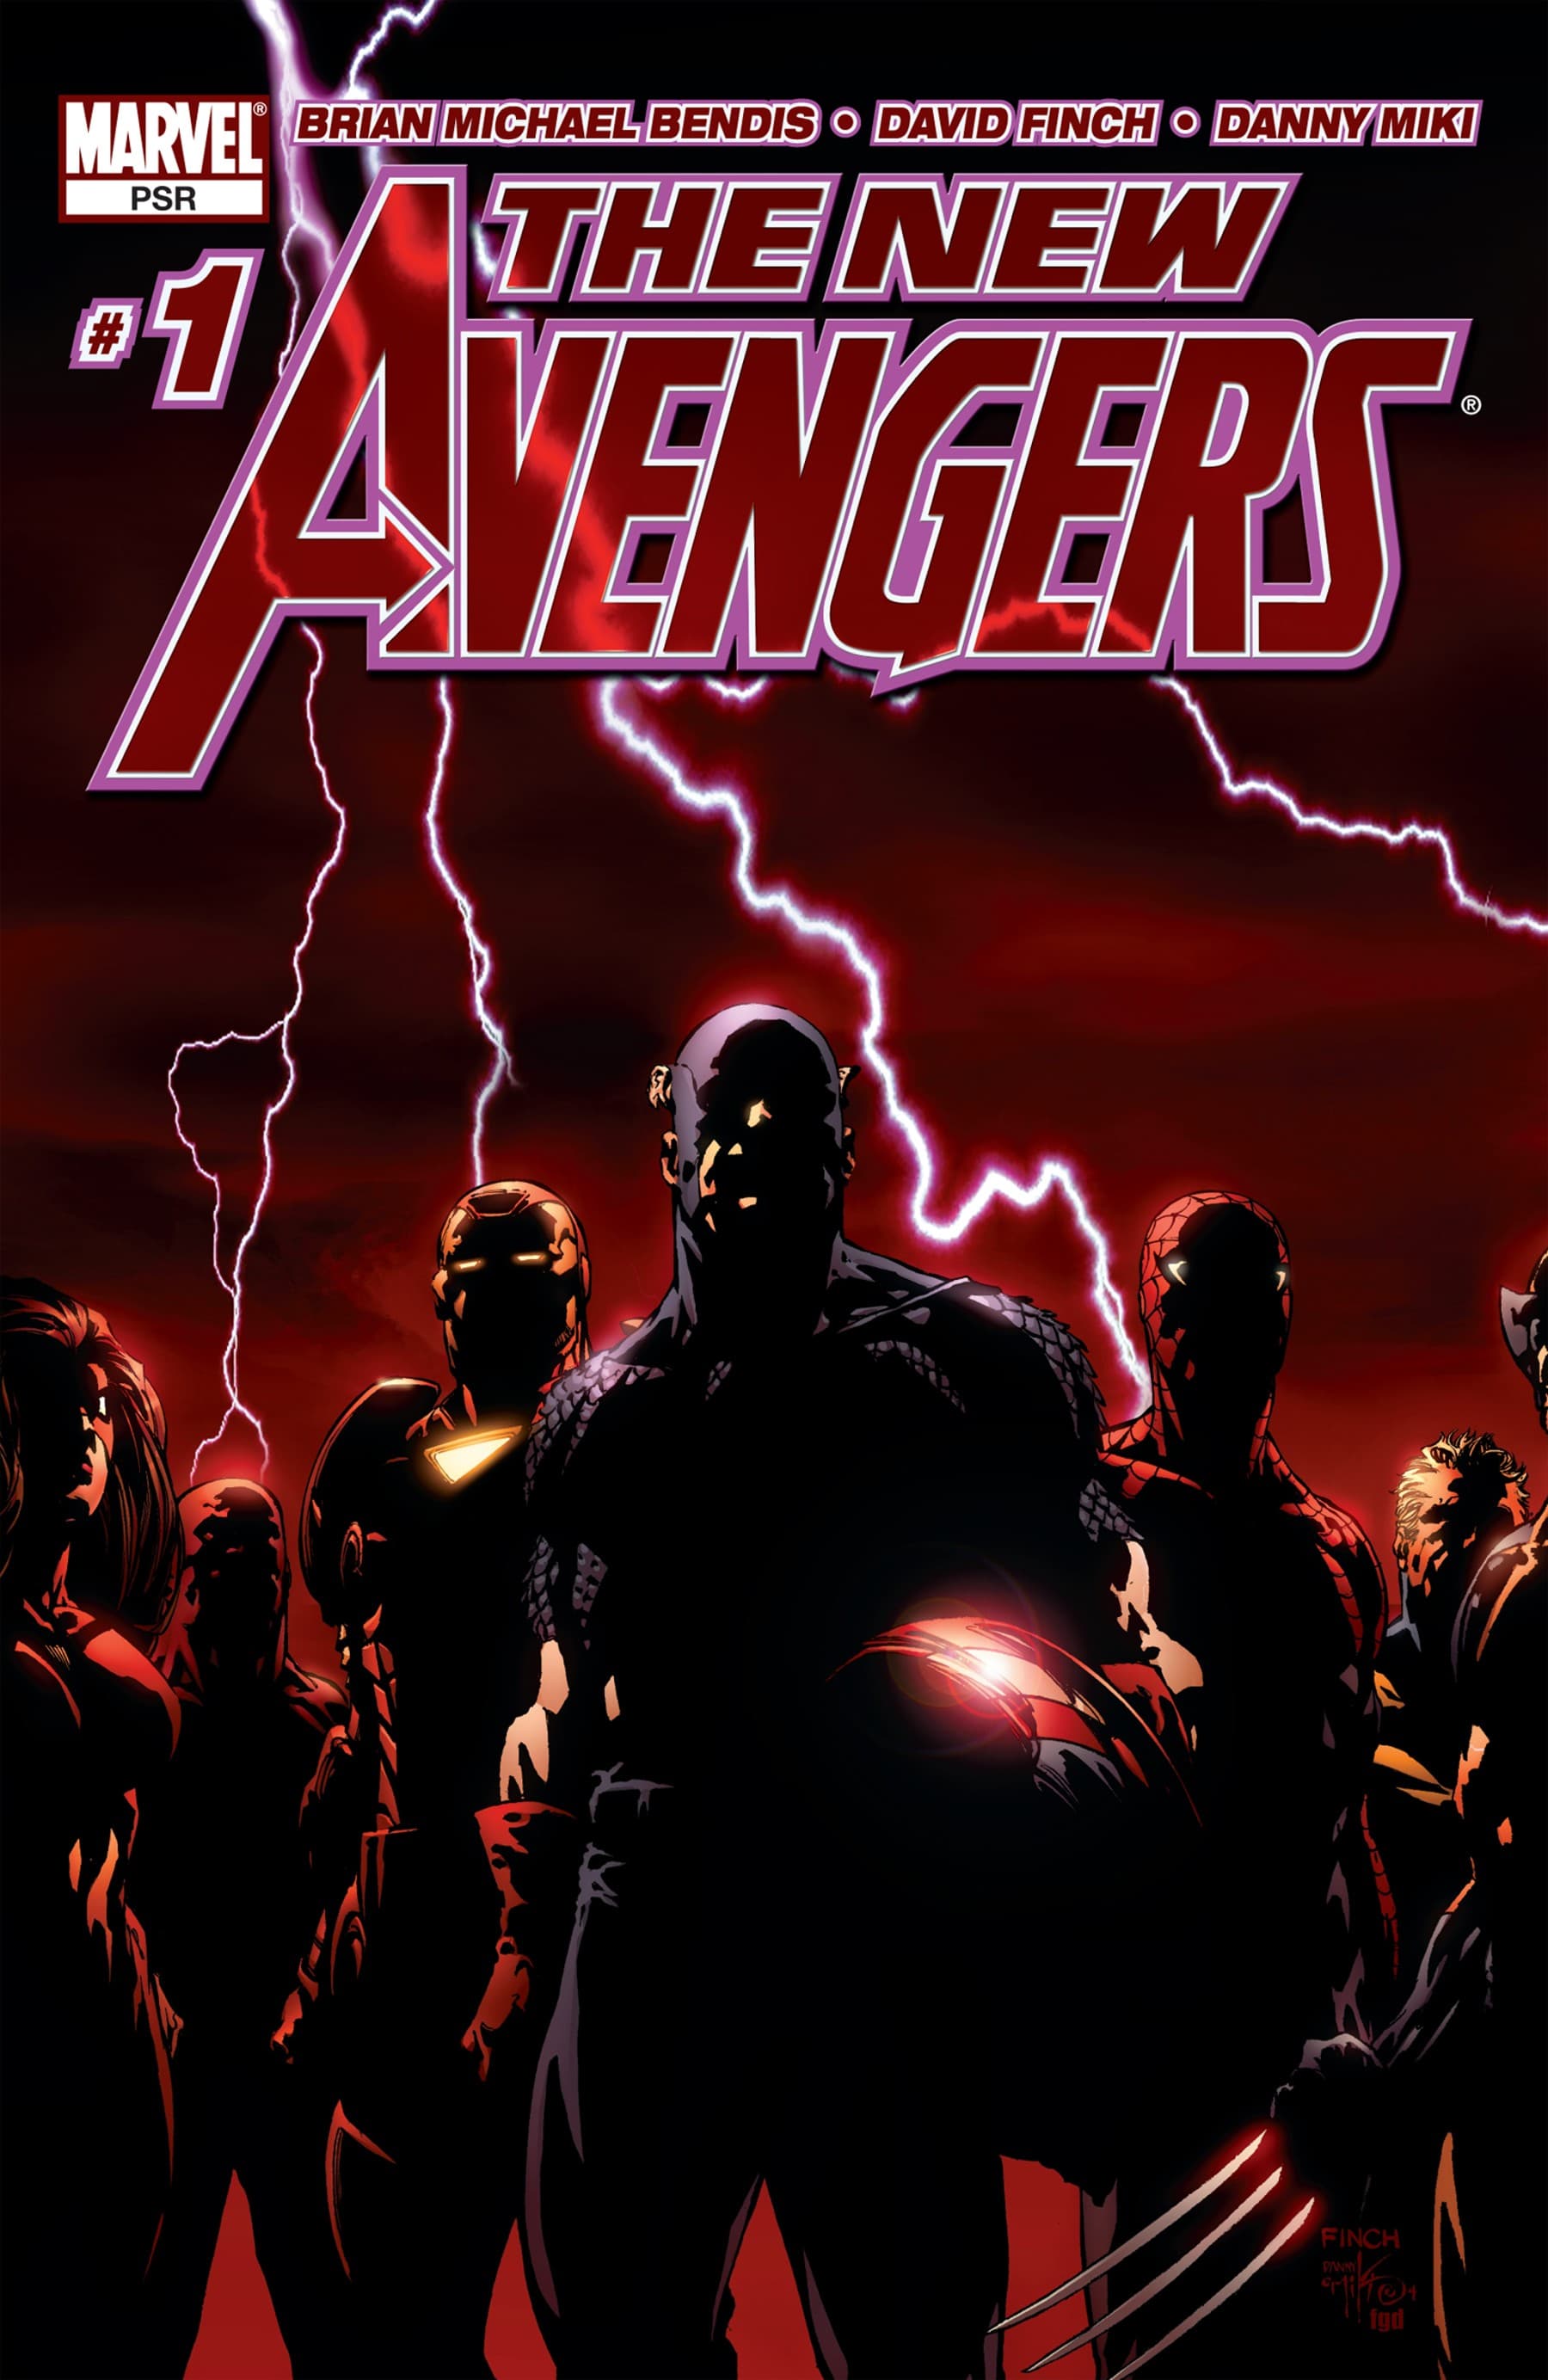 NEW AVENGERS (2004) #1 cover by David Finch